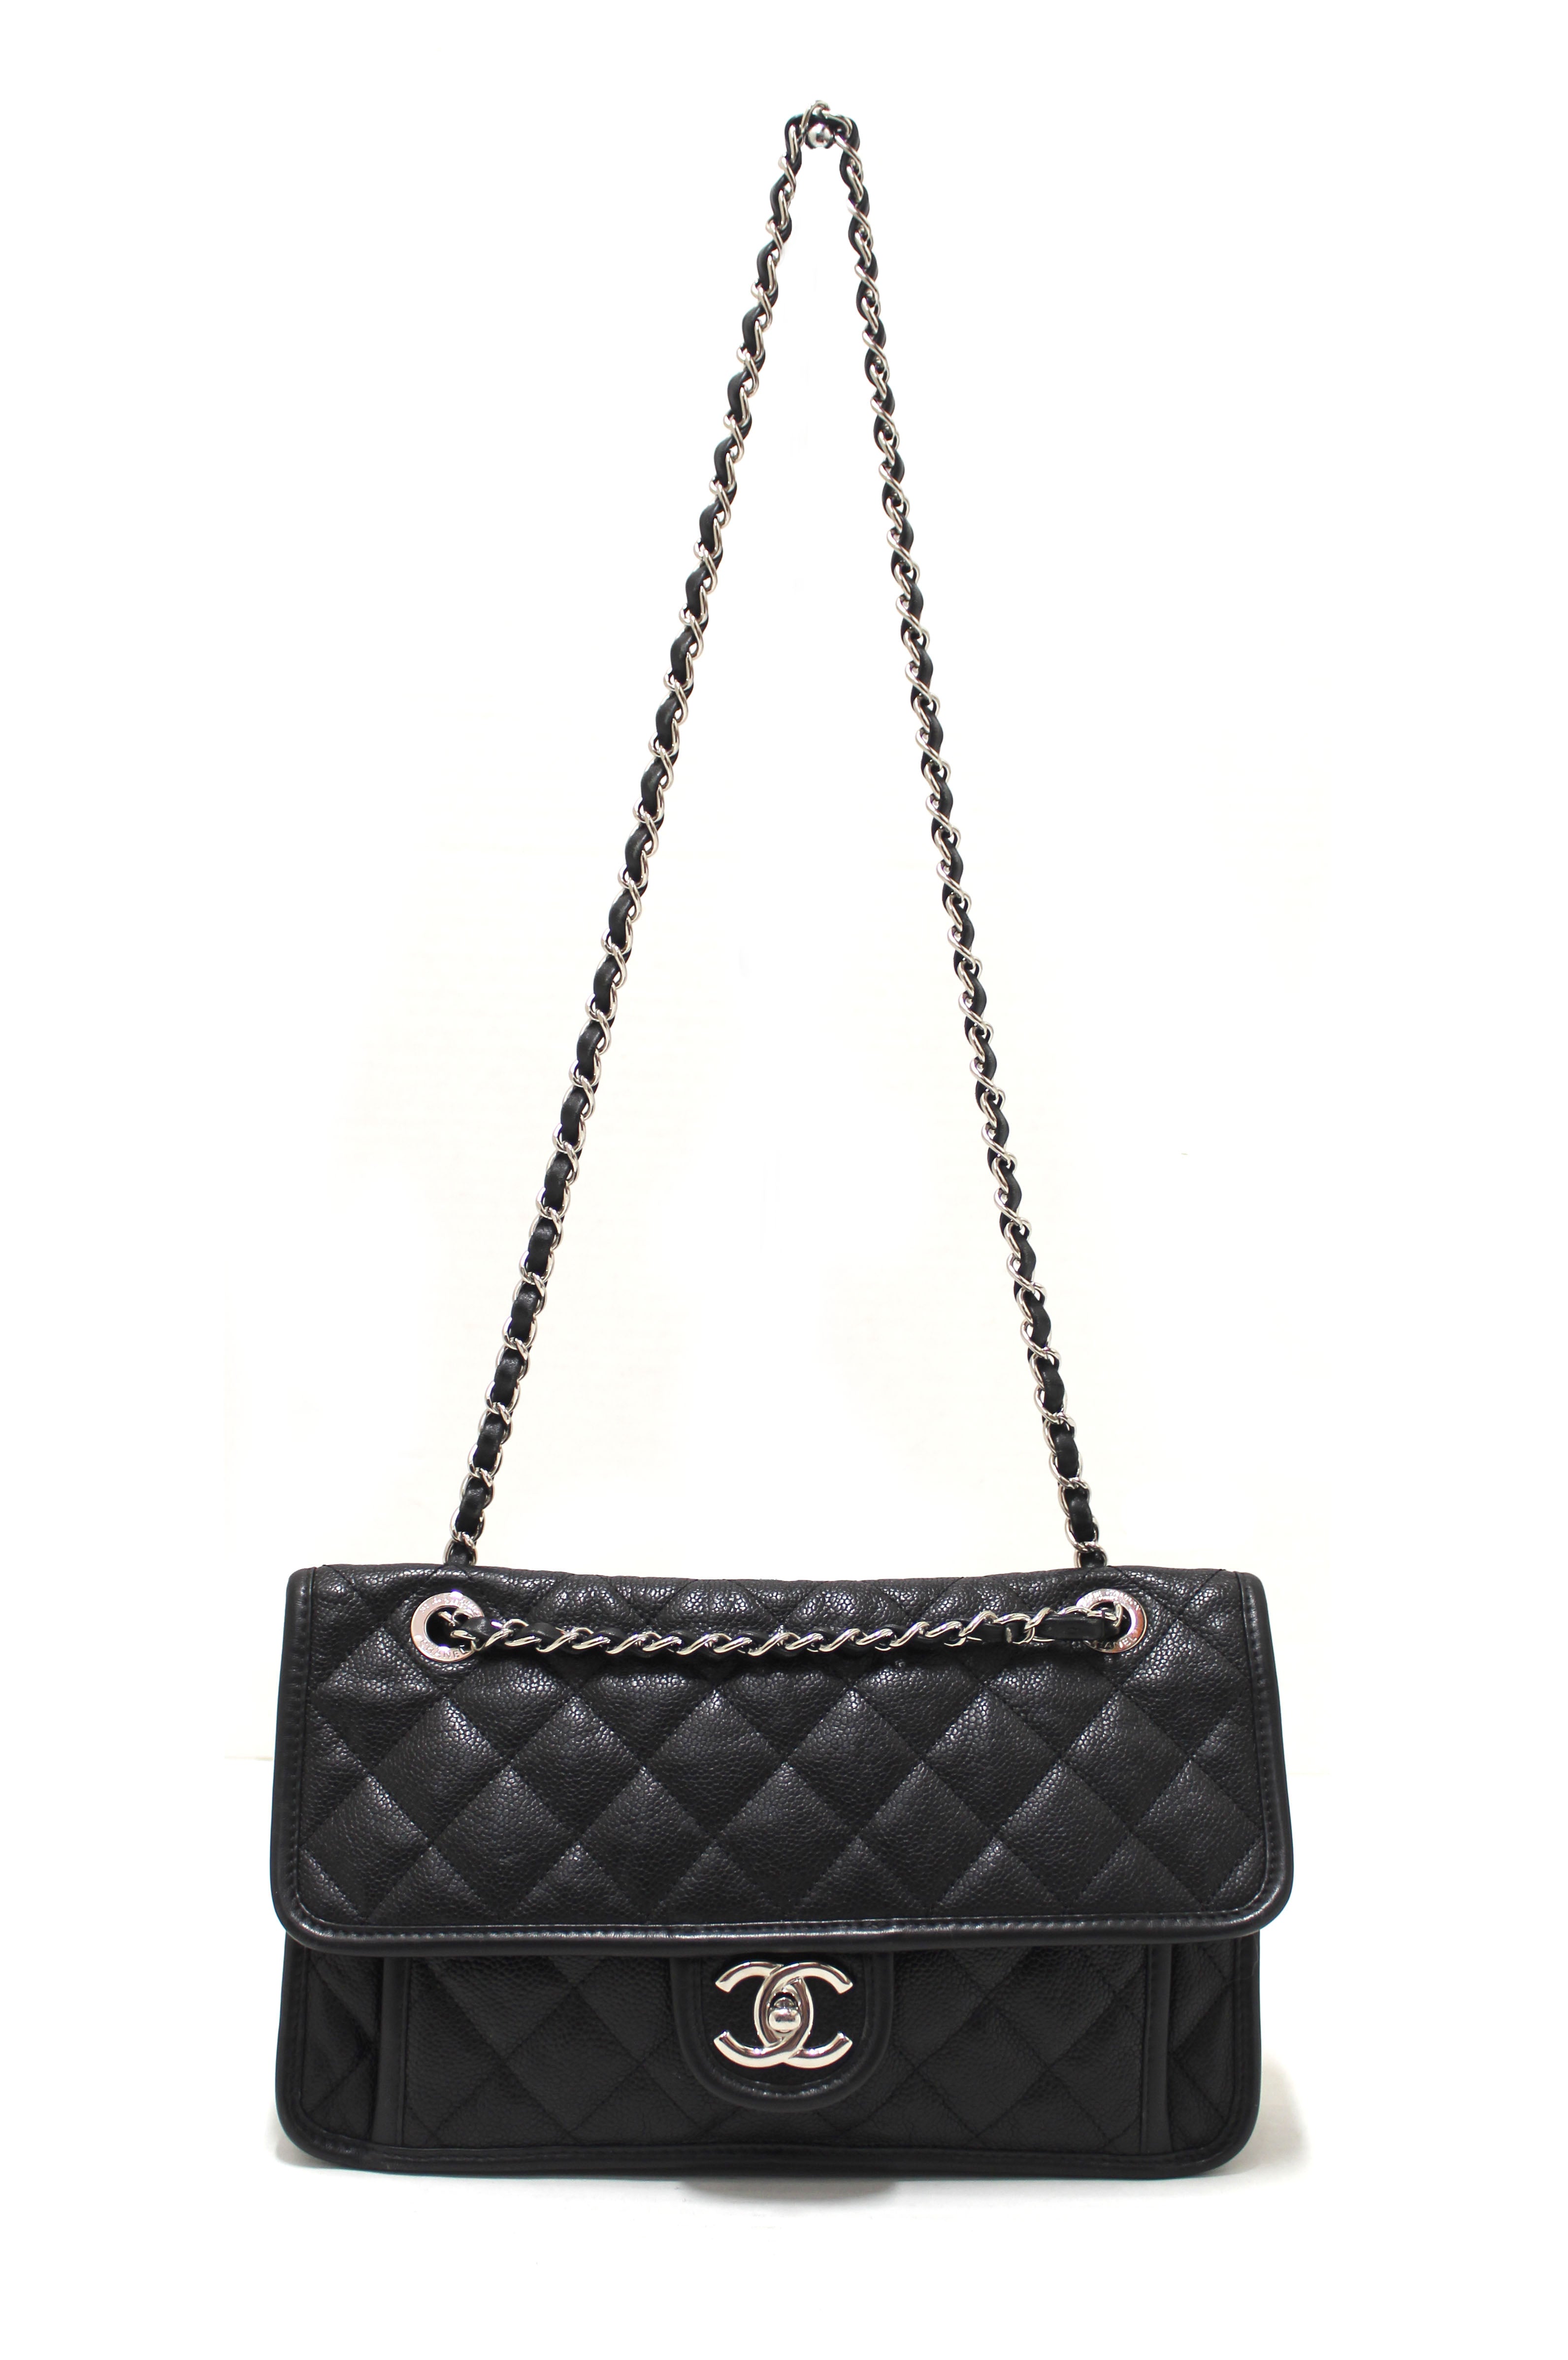 Authentic Chanel Black Quilted Caviar Leather Riviera Flap Shoulder Bag